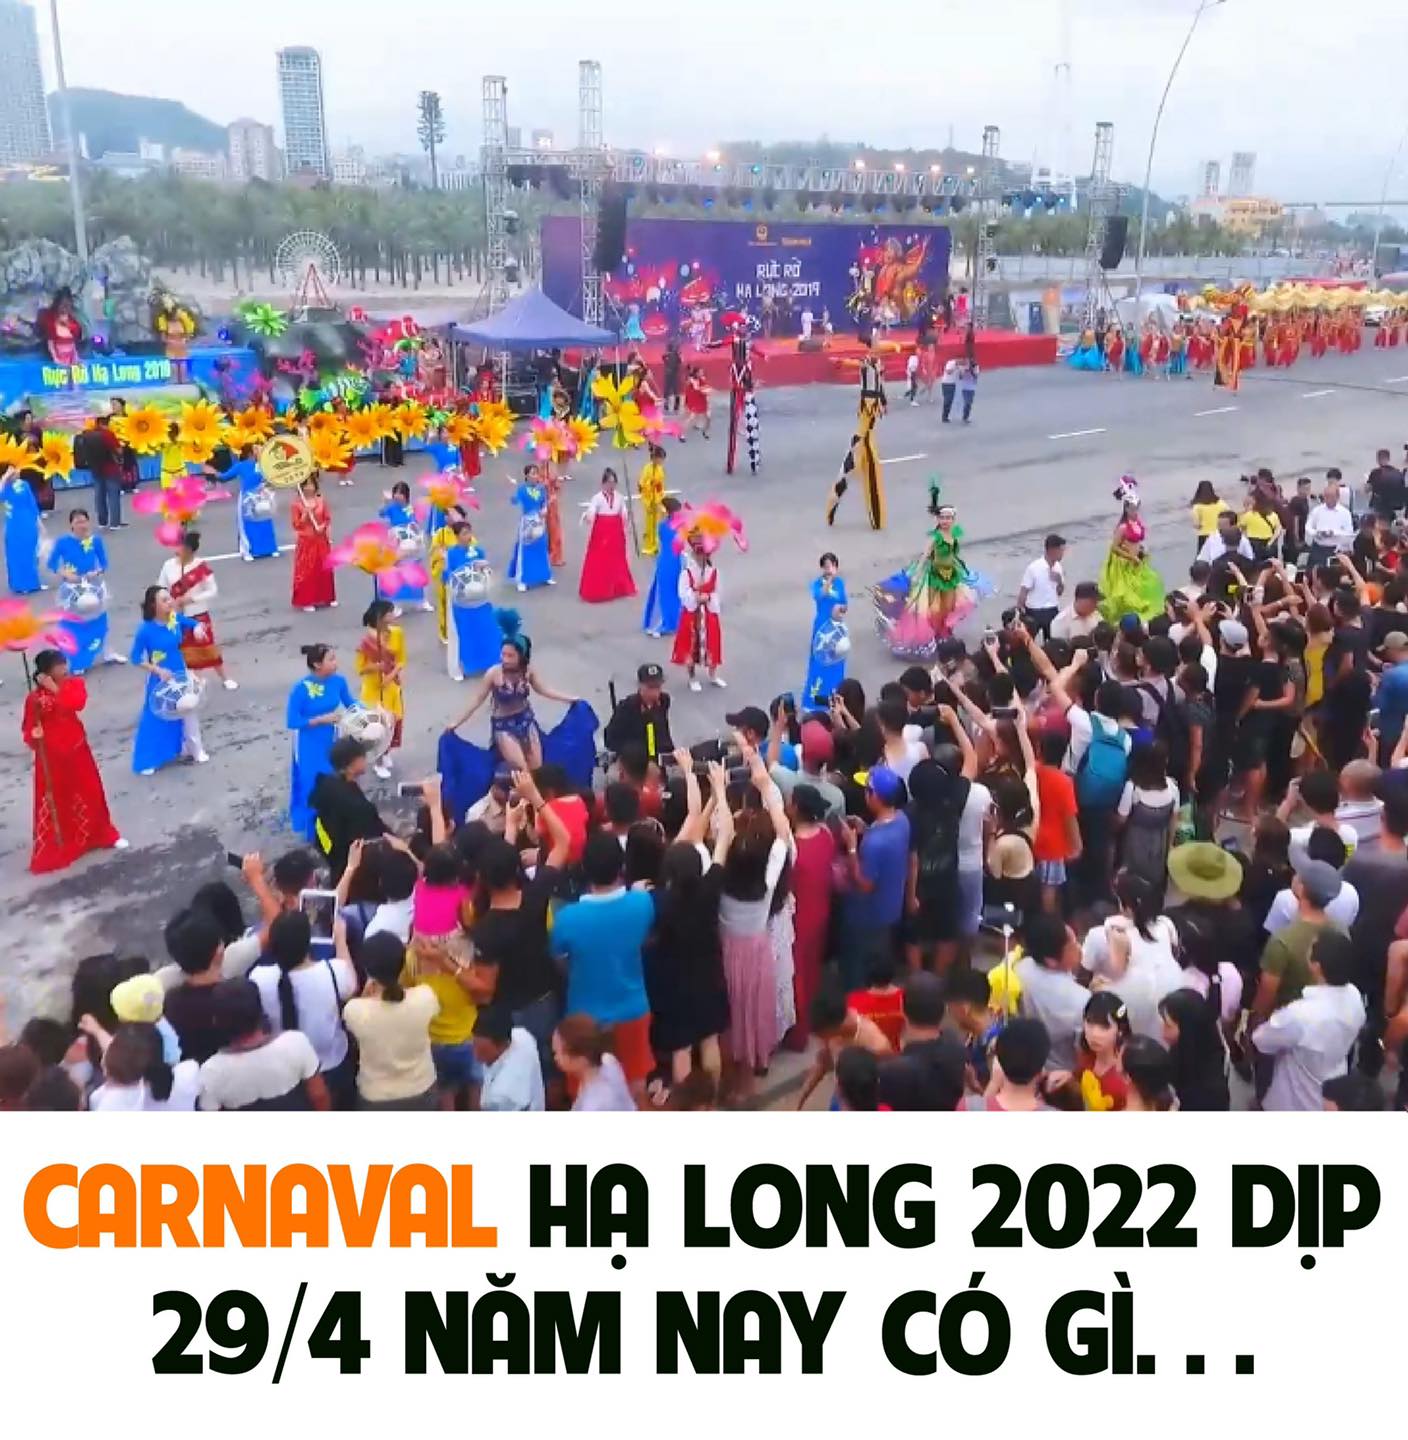 canarval hạ long 2022